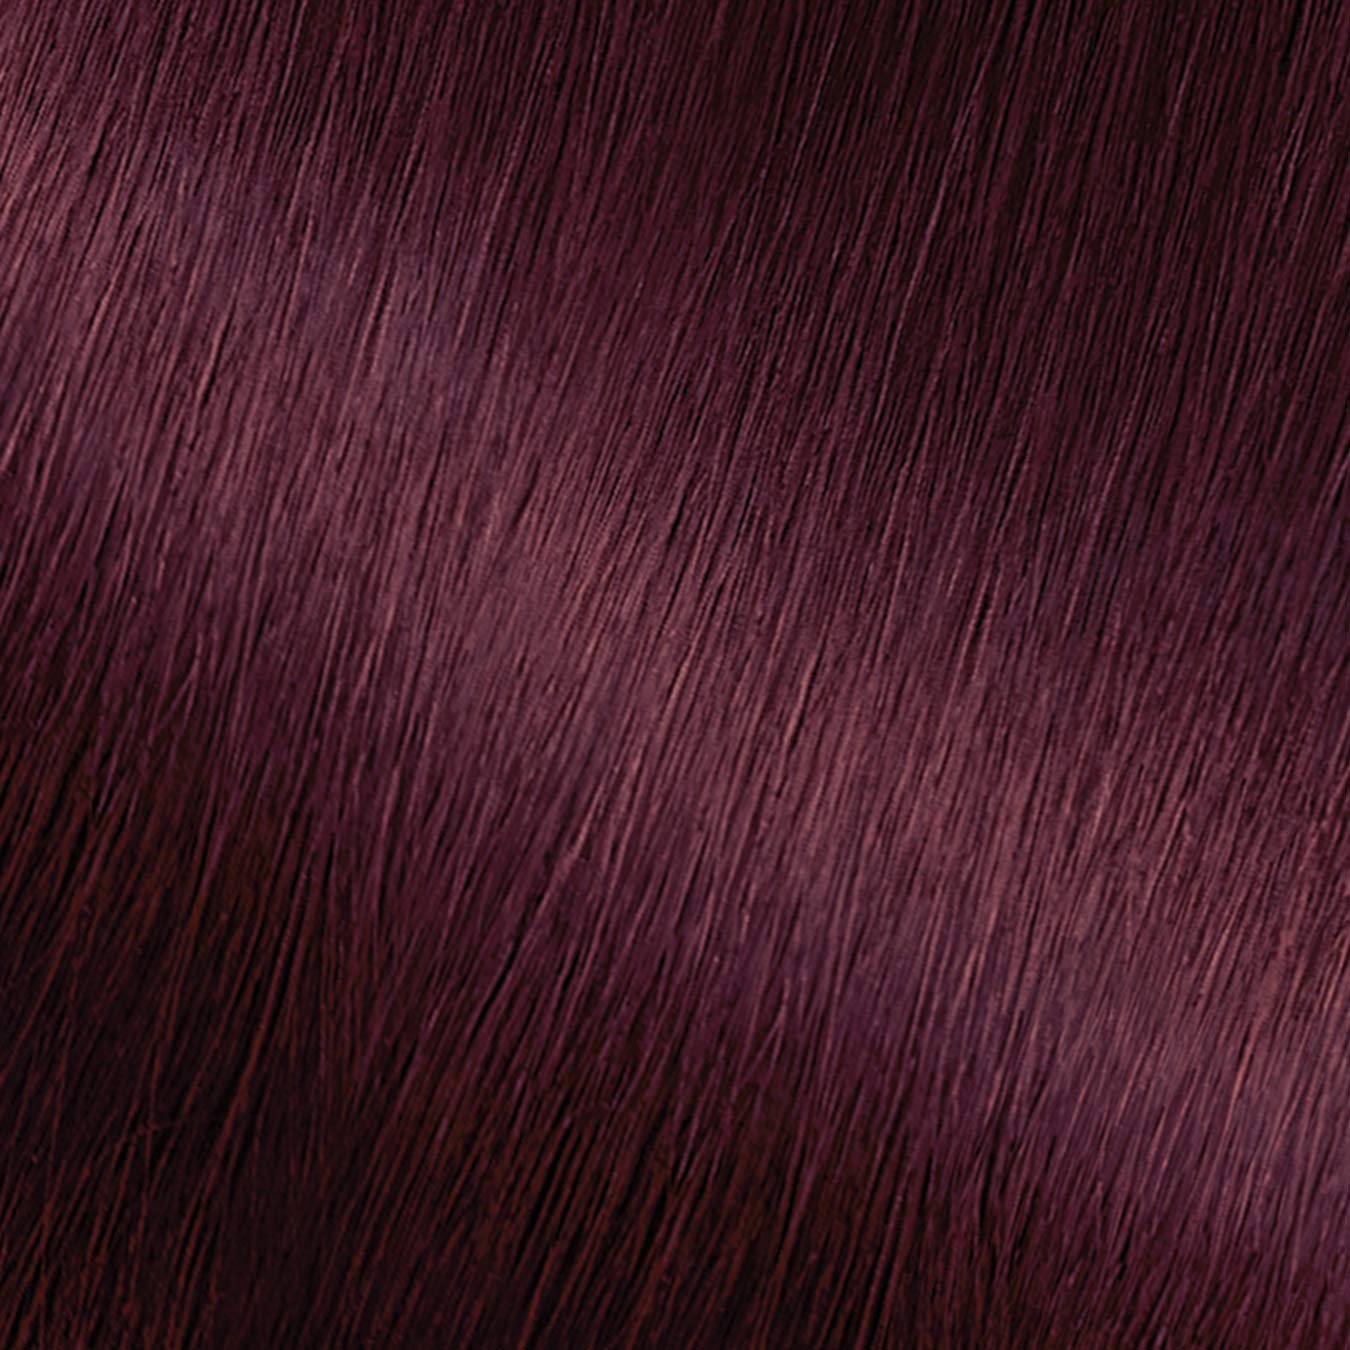 Hair Swatch of Nutrisse Ultra Coverage 420 Cabernet.